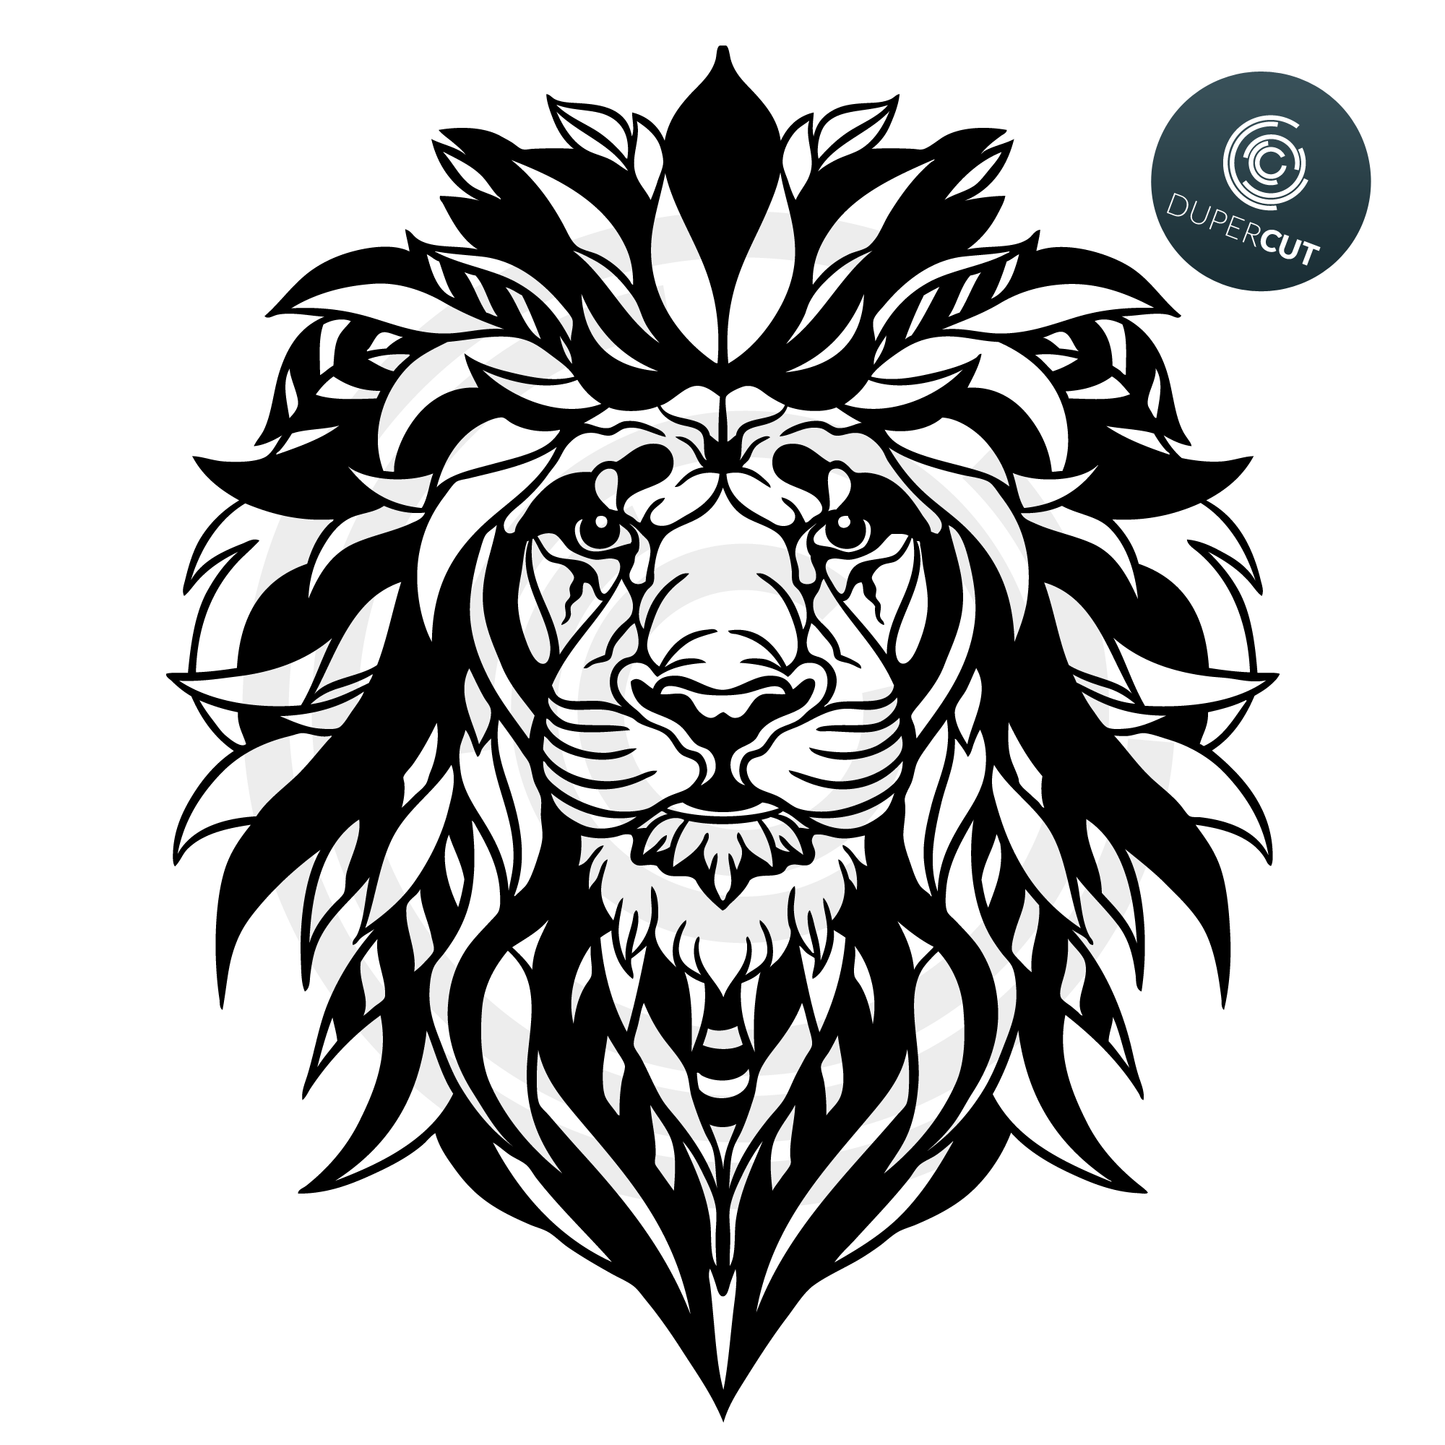 Decorative lion, black and white tatto style simple art.SVG PNG DXF files Paper cutting template for personal or commercial use. Vinyl template cutting files for Cricut, Glowforge, Silhouette, CNC